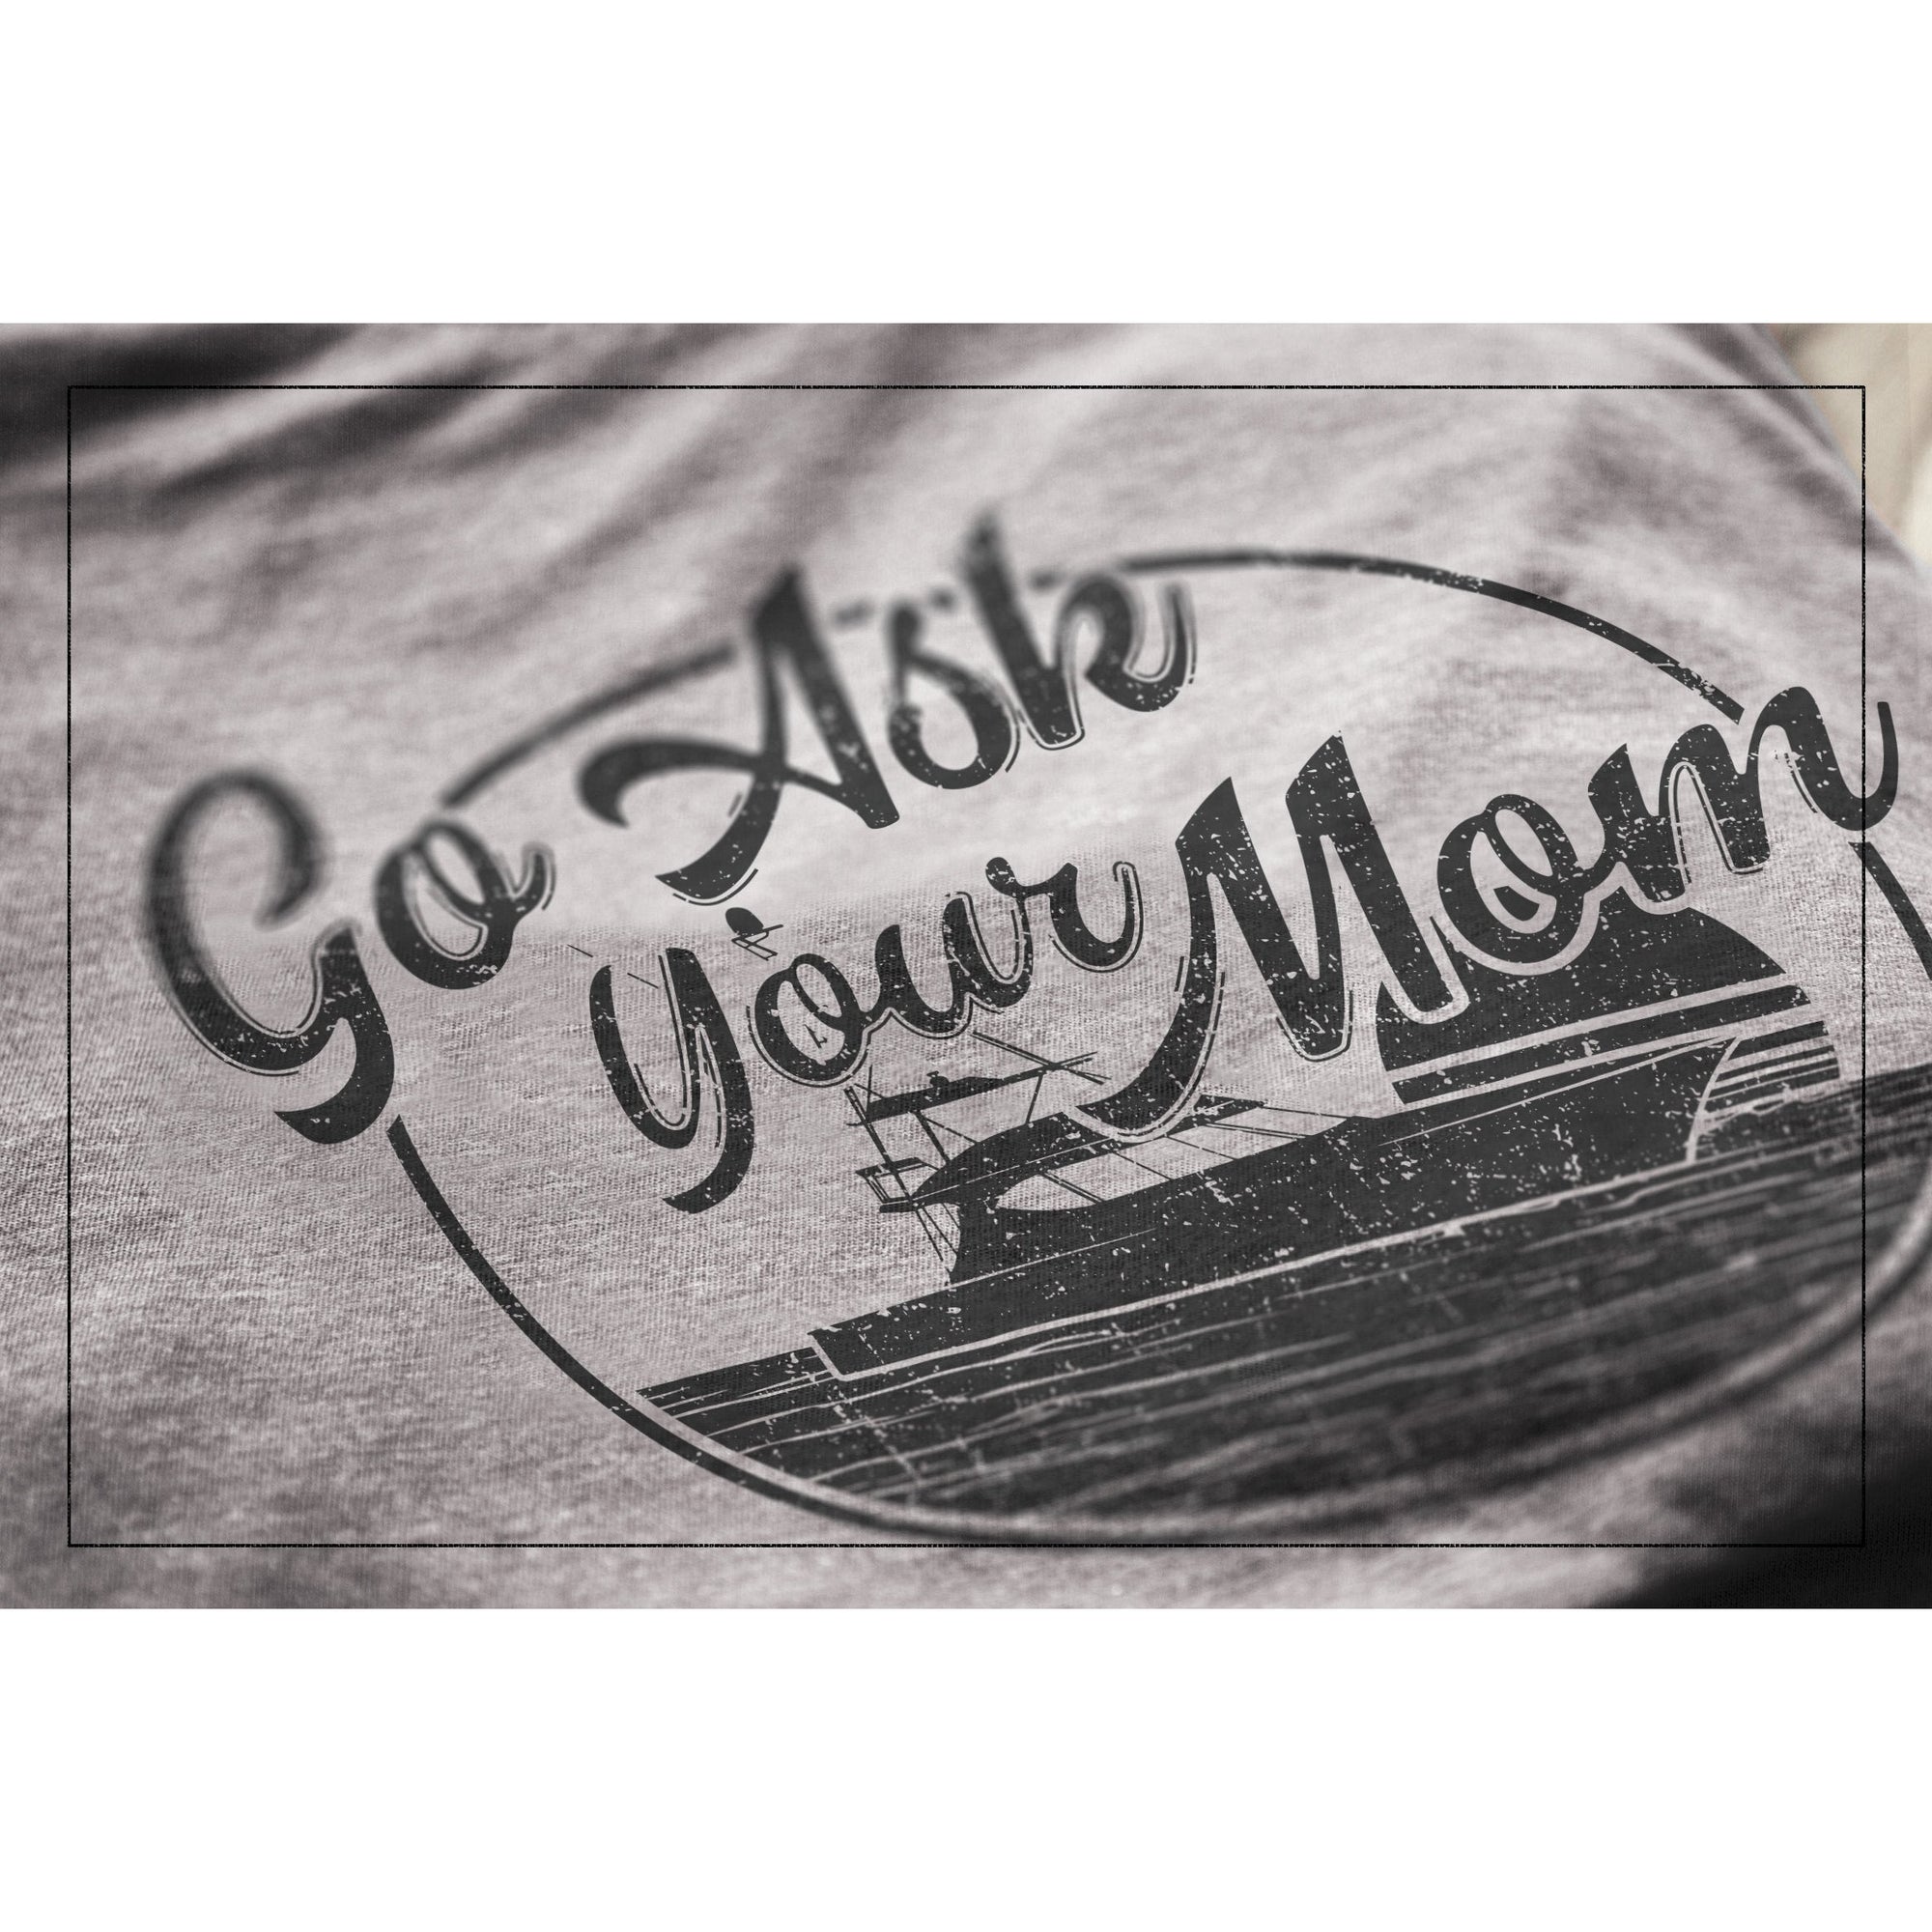 Go Ask Your Mom Heather Grey Printed Graphic Men's Crew T-Shirt Tee Closeup Details